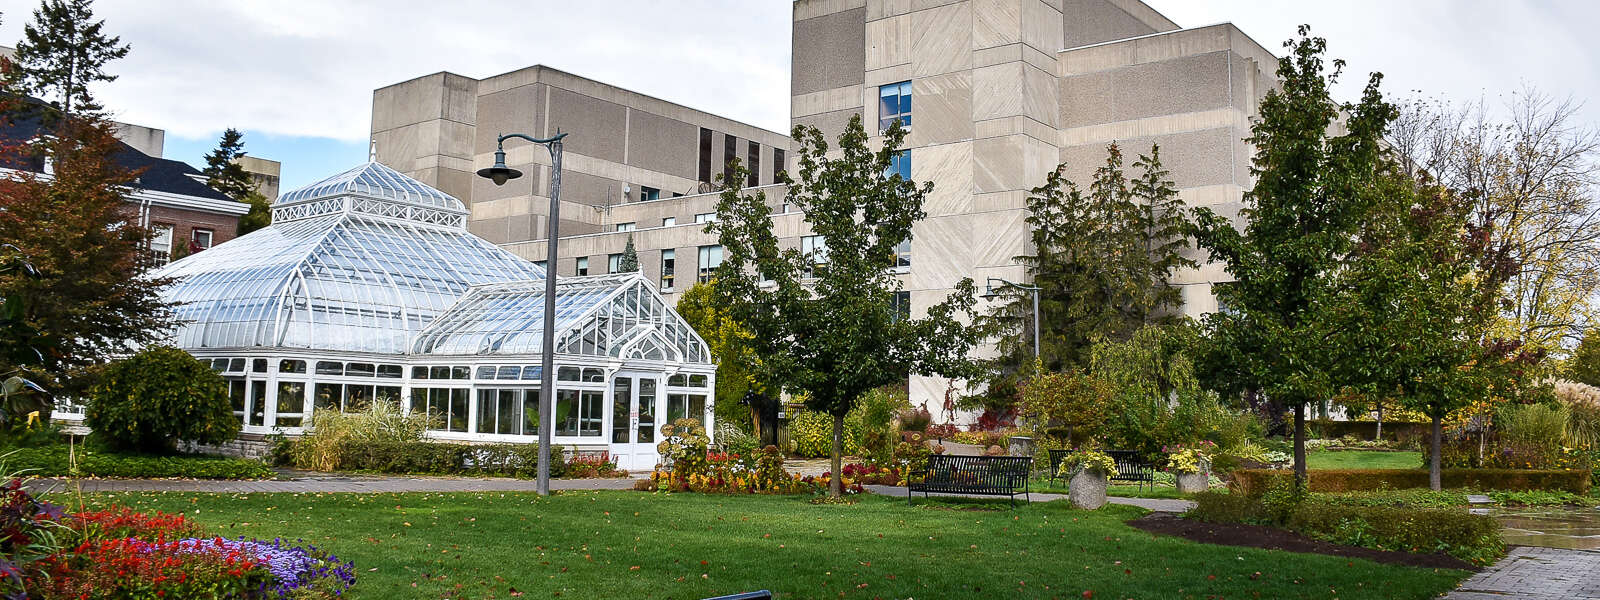 The conservatory gardens in front of the concrete university centre on the U of G campus